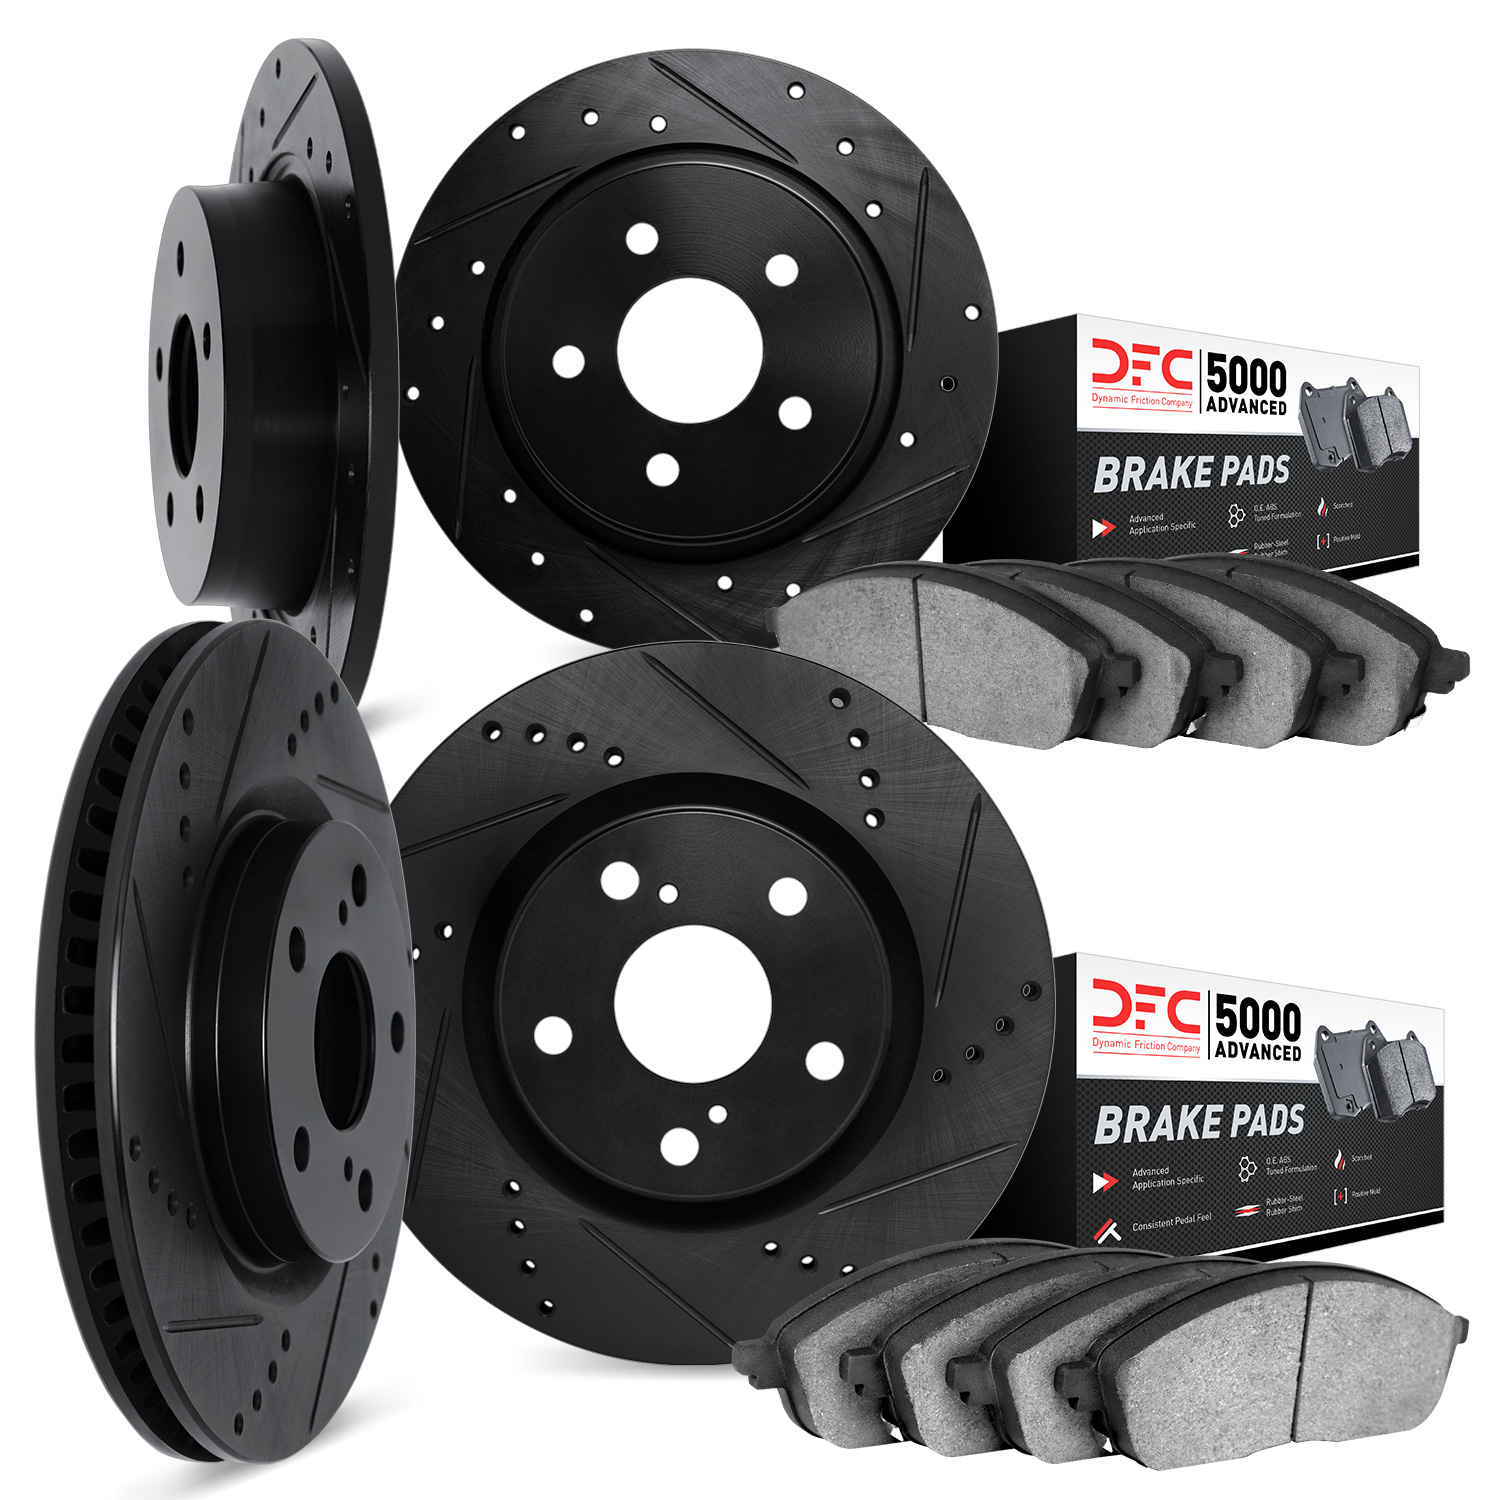 8504-76159 Drilled/Slotted Brake Rotors w/5000 Advanced Brake Pads Kit [Black], 2004-2009 Lexus/Toyota/Scion, Position: Front an